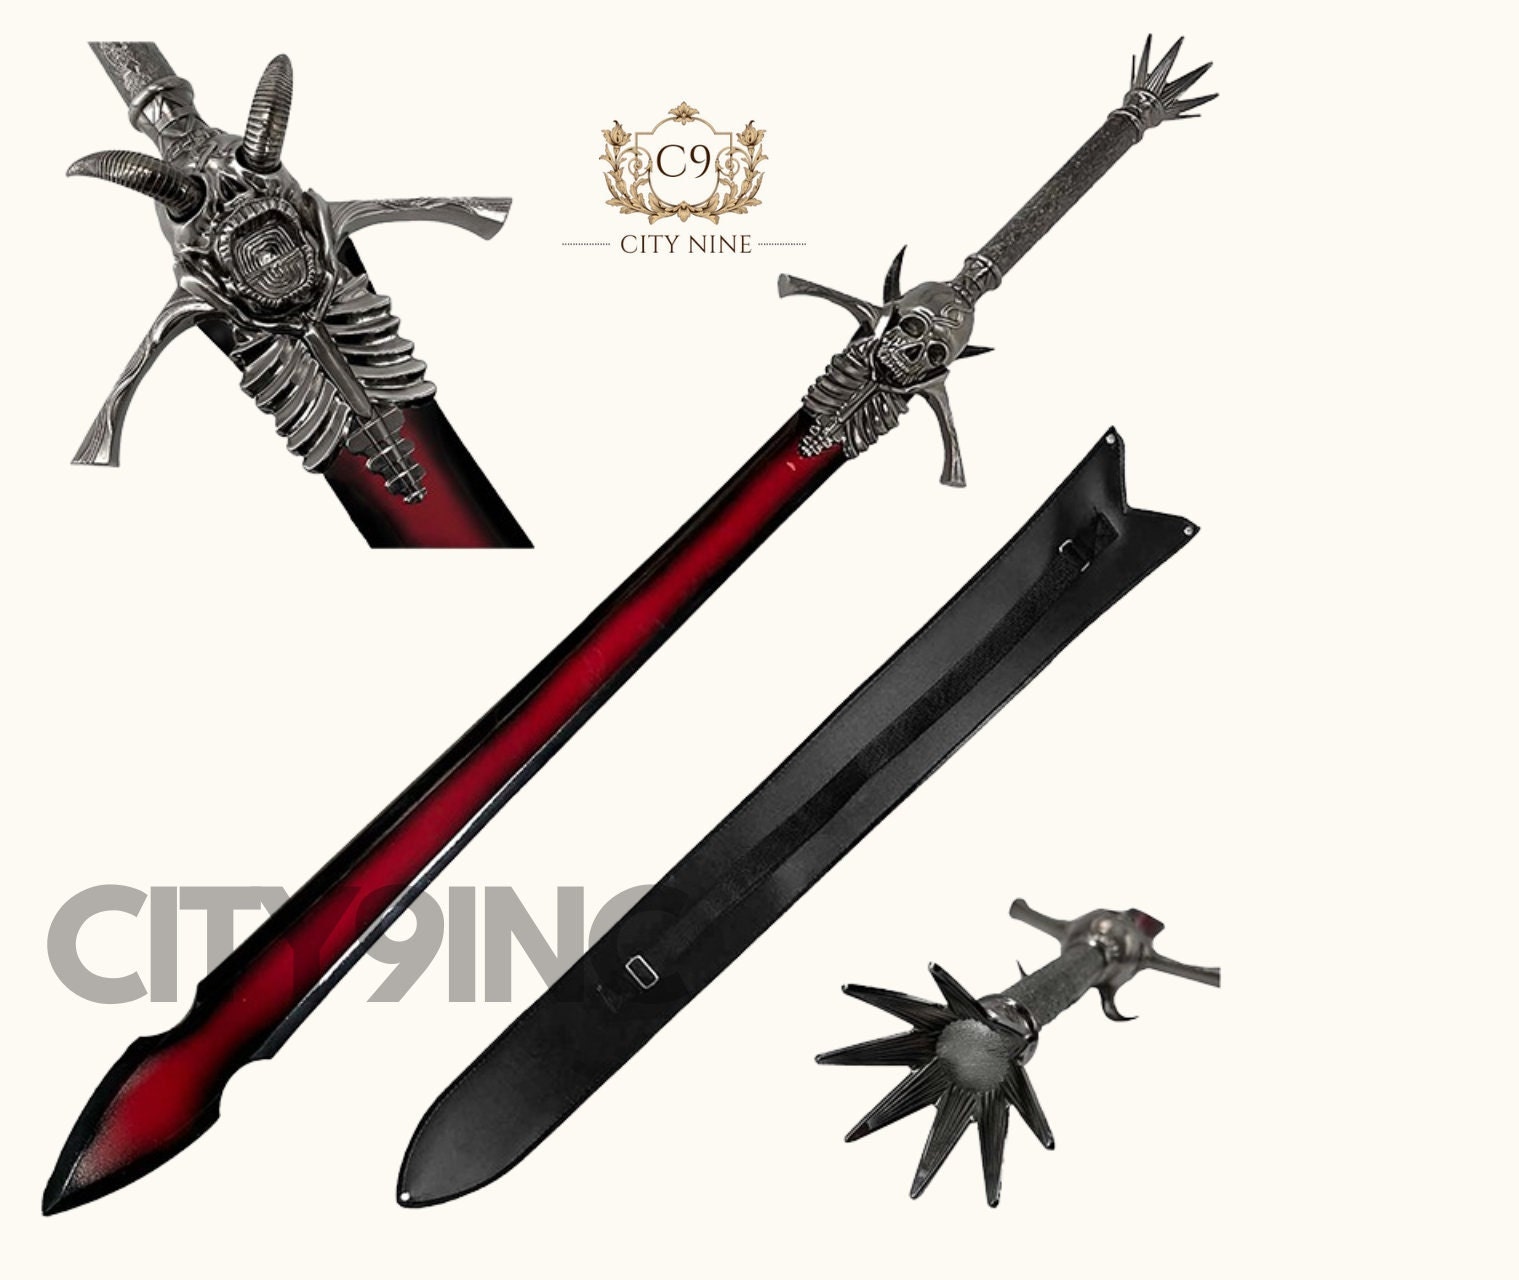  Plastic Vergil Sword Yamato,Devil May Cry,Anime Original  Texture,1:1 Restore,Vergil Role Play Accessories,Used For Collection and  Role-Playing : Sports & Outdoors